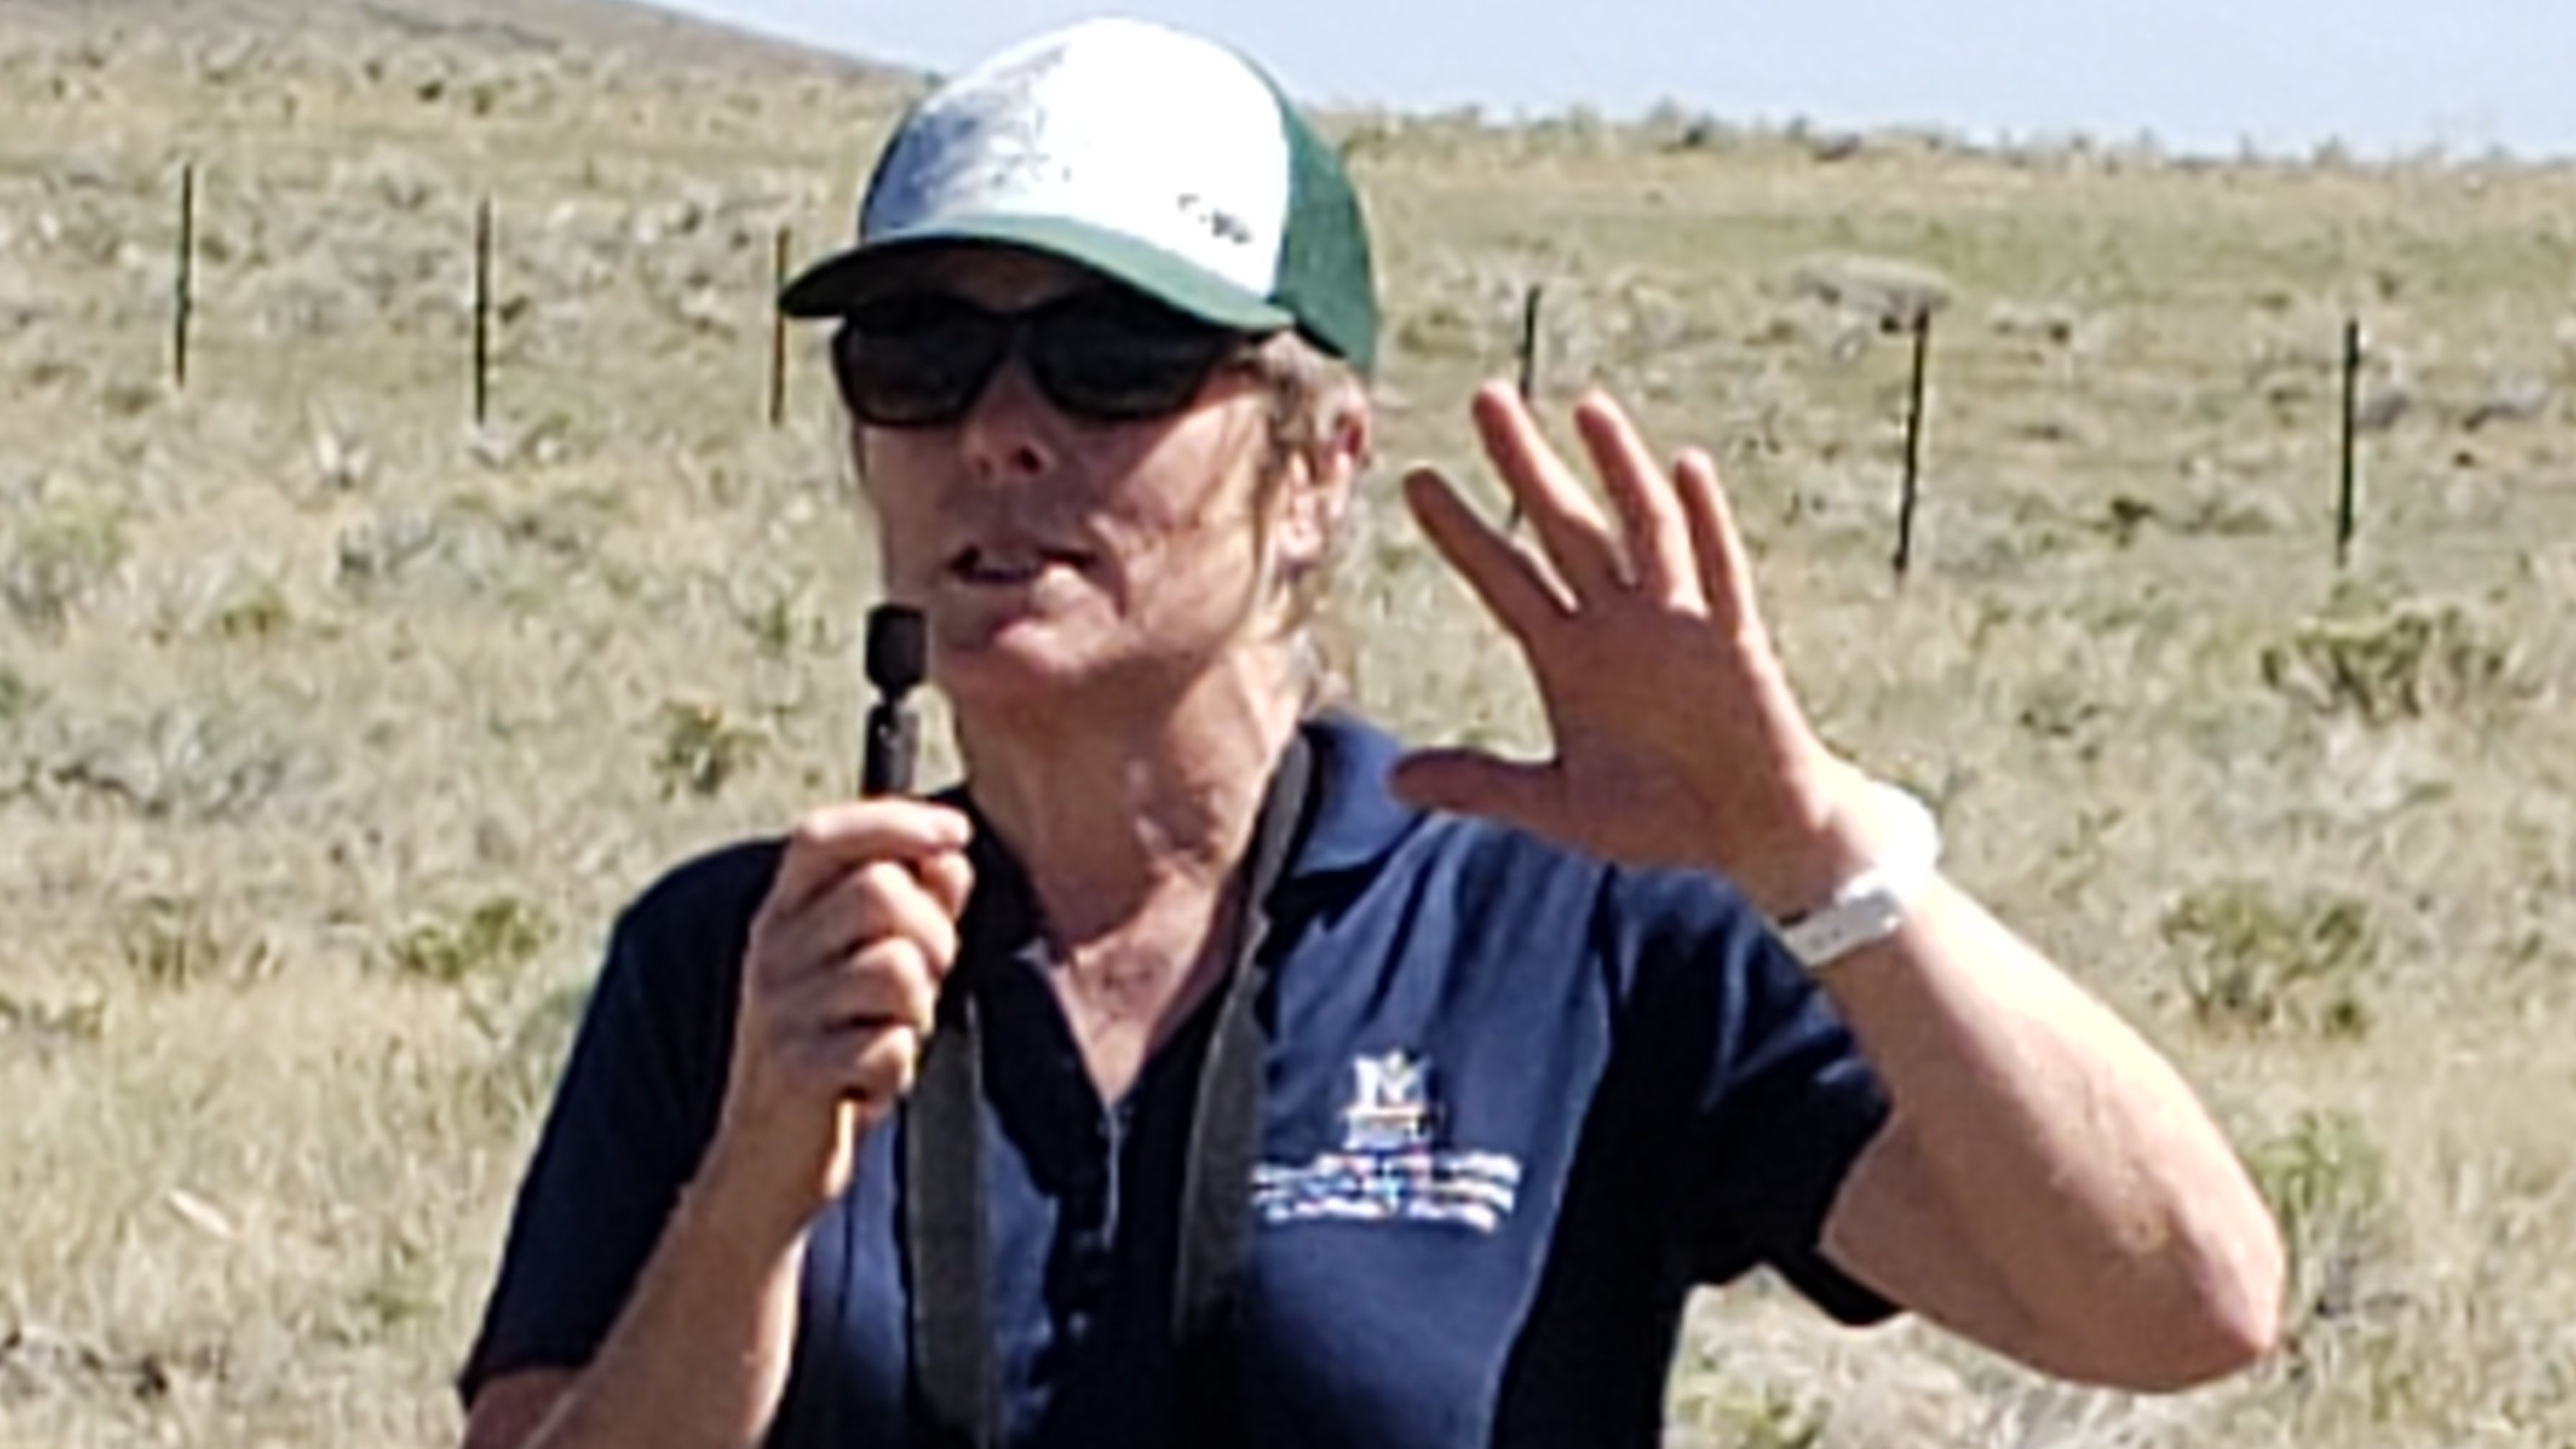 Dr. Rew presenting at a field day